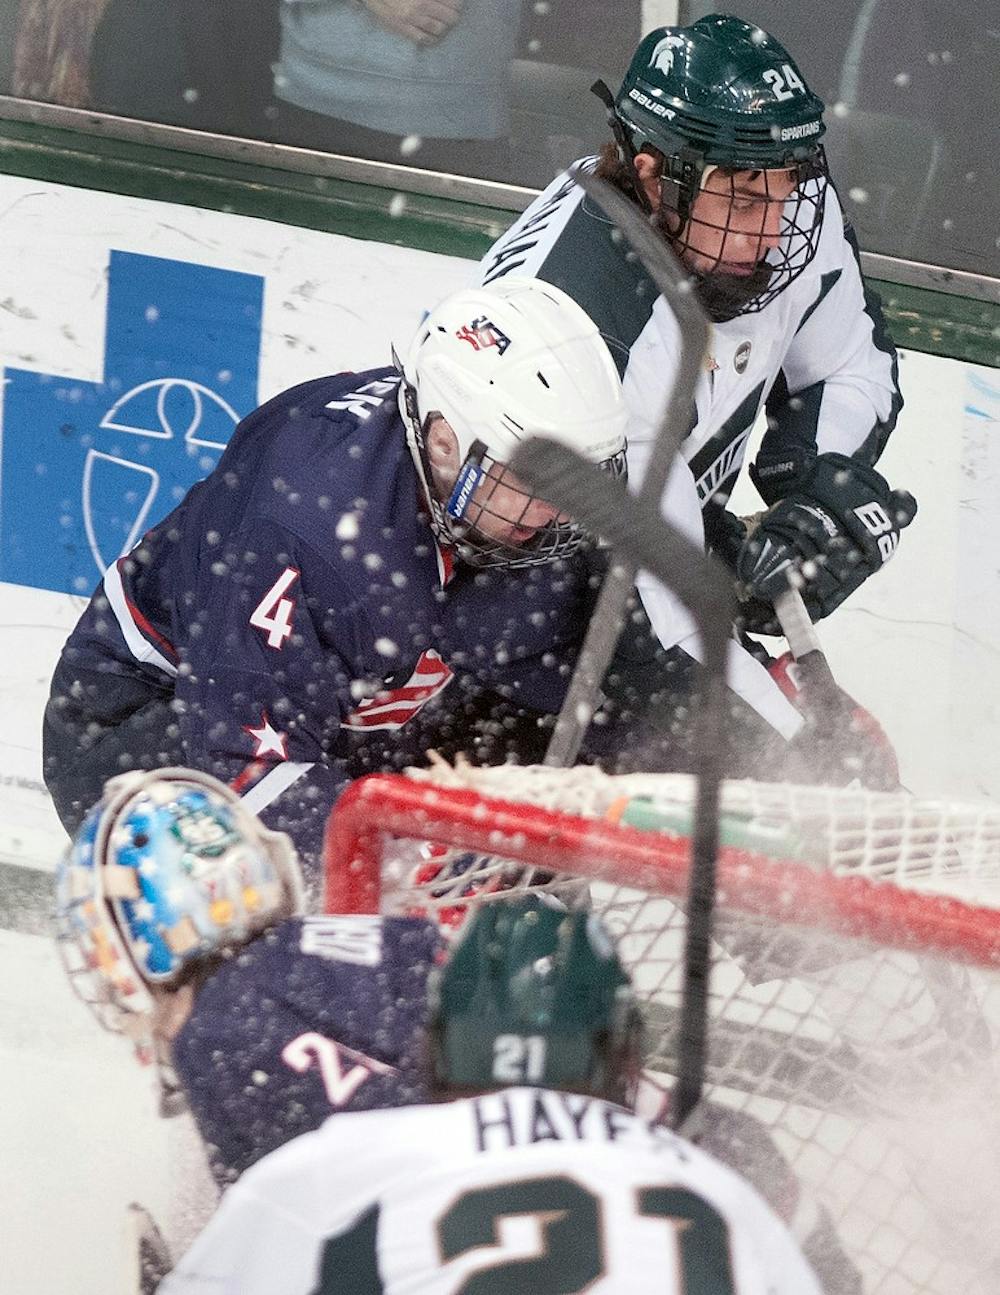 	<p>Redshirt freshman forward Justin Hoomaian battles for the puck with U.S. National Team Development Program defenseman Will Butcher on Tuesday, Jan. 22, 2013, at Munn Ice Arena. <span class="caps">MSU</span> lost the exhibition game 3-0. Danyelle Morrow/The State News</p>